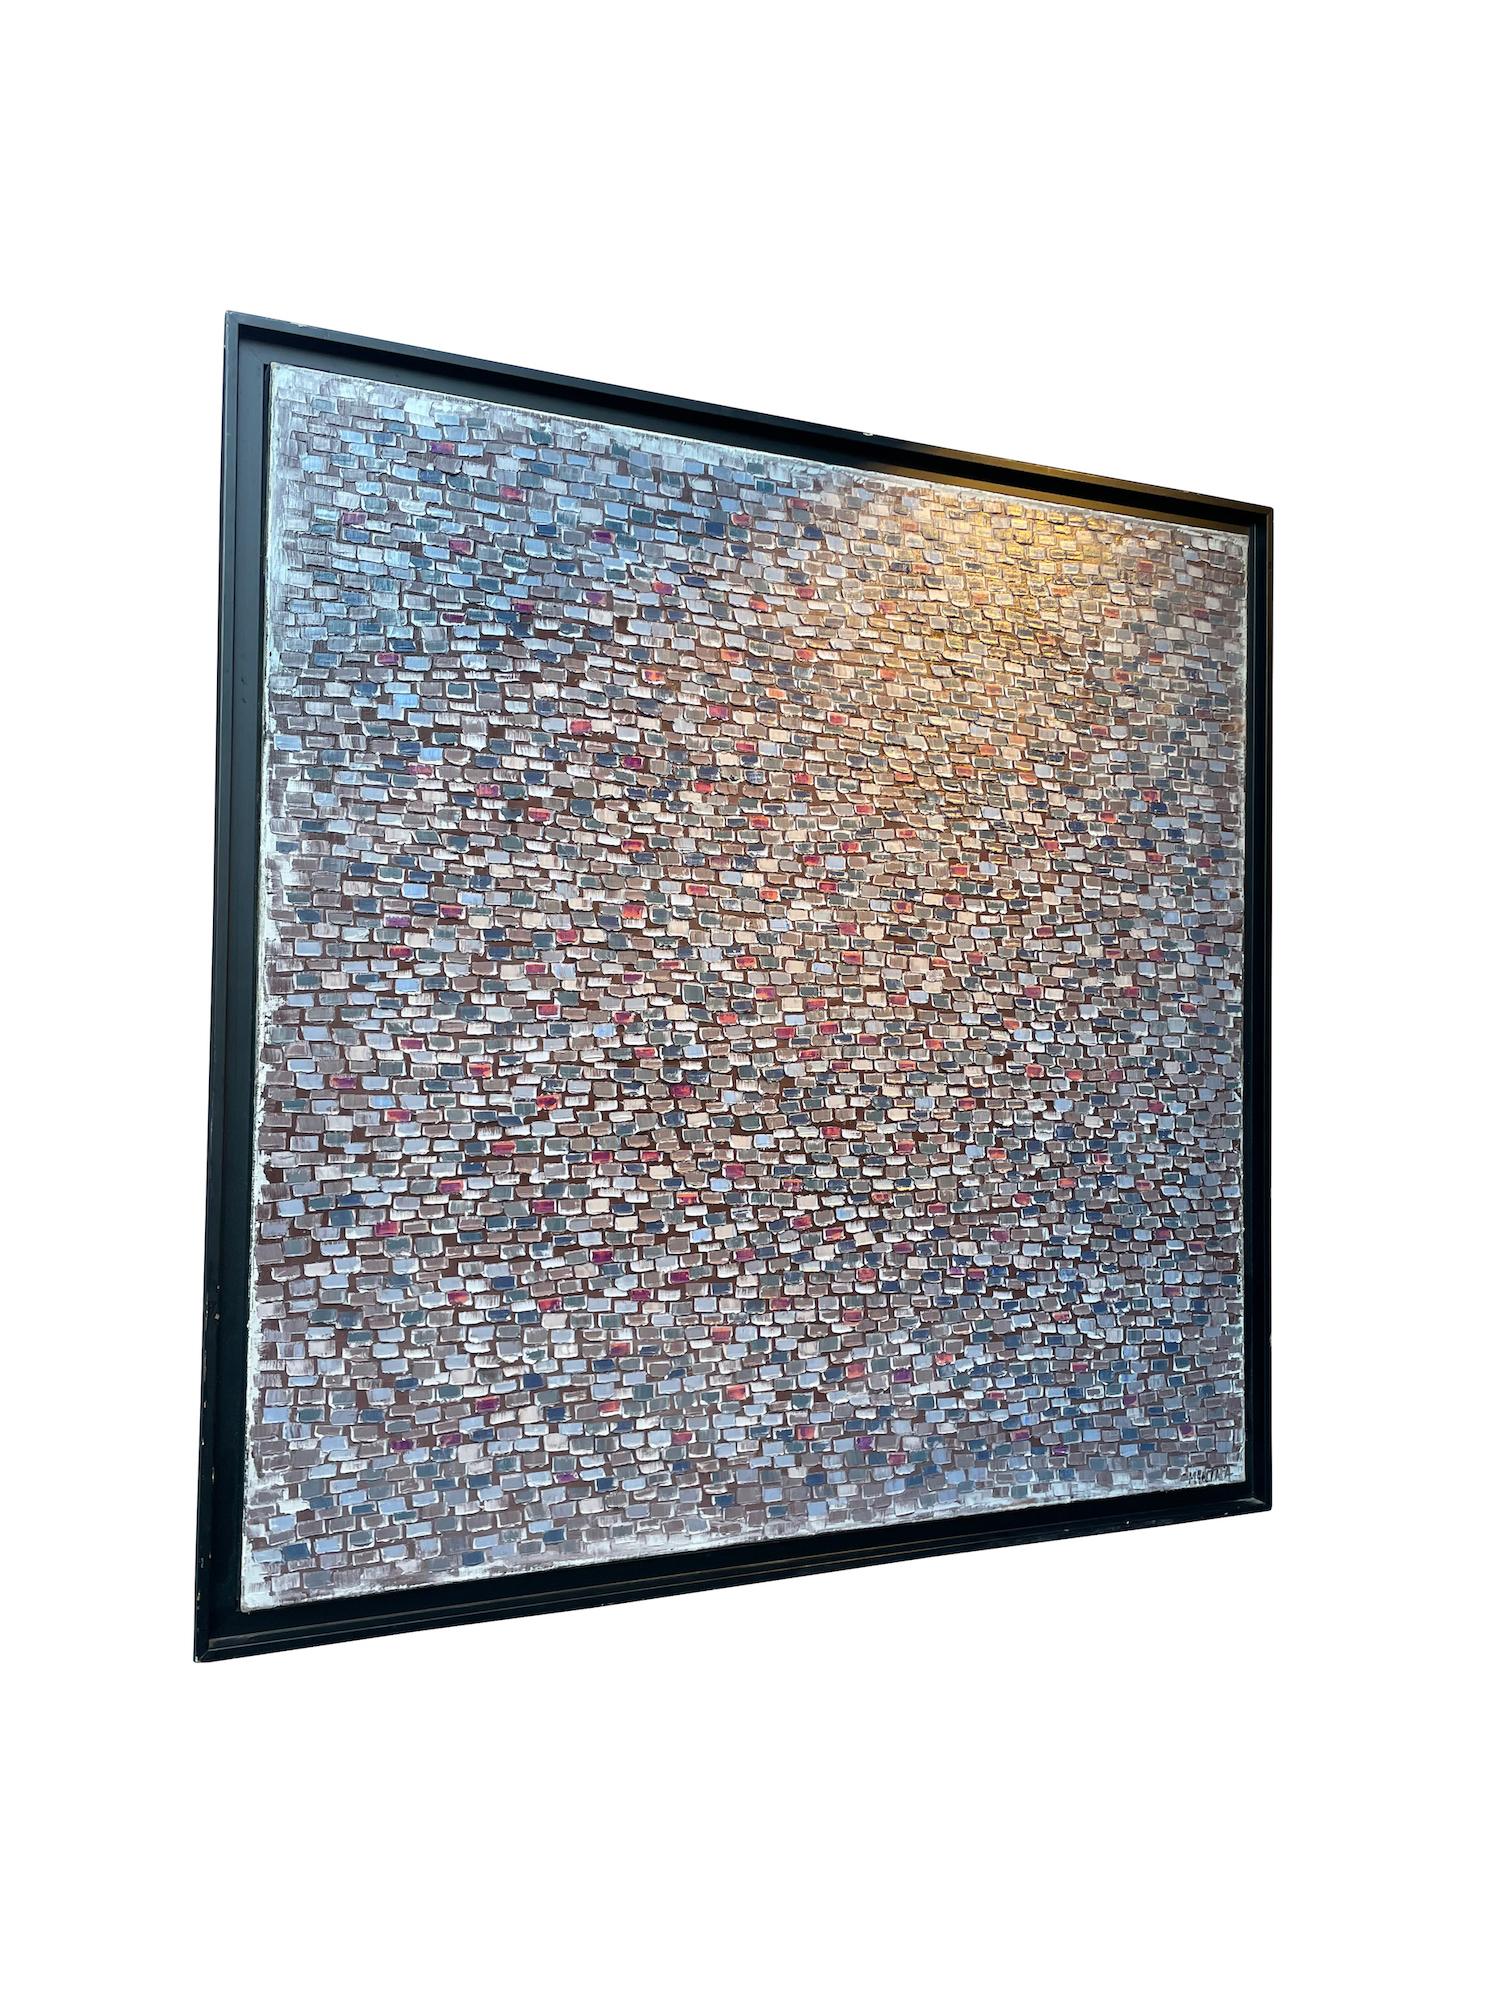 Contemporary Italian oil abstract painting with many
mini rectangles placed horizontally.
Shades of blue, grey, cream and red.
Thin black wood shadow frame.
Signed by the artist MANTRA.
